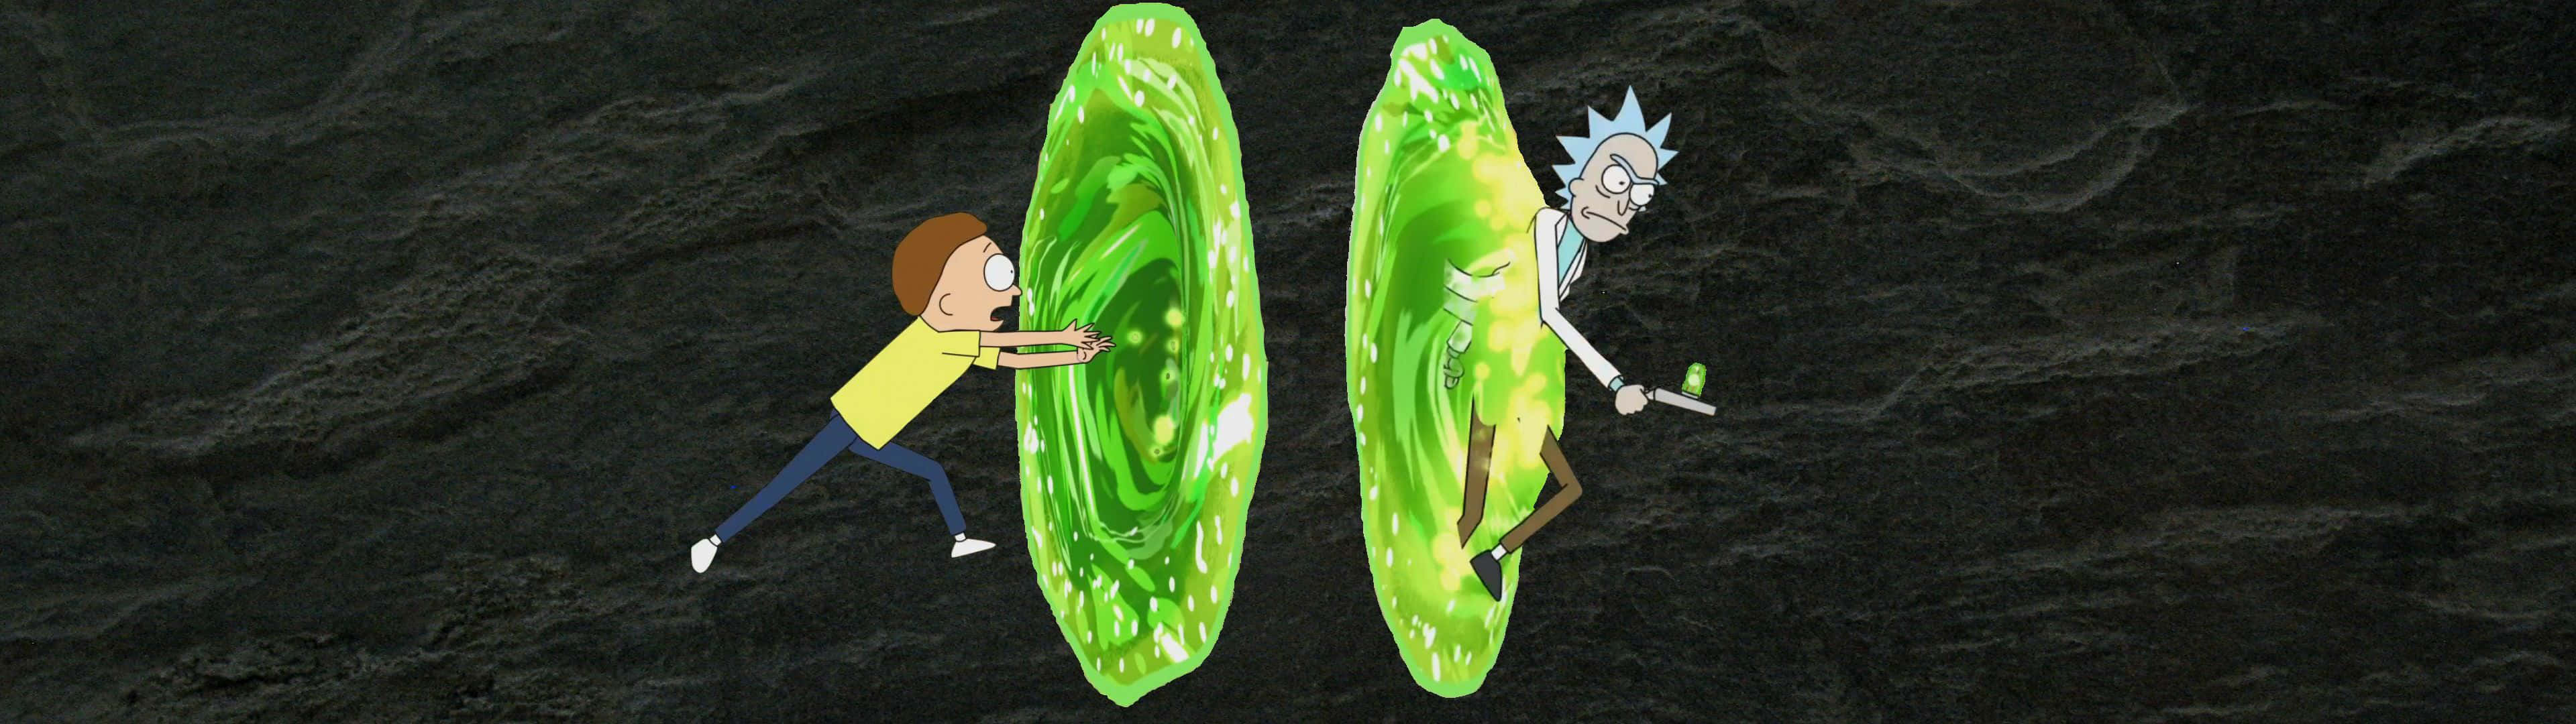 Rickund Morty Coole Dual-monitor Wallpaper